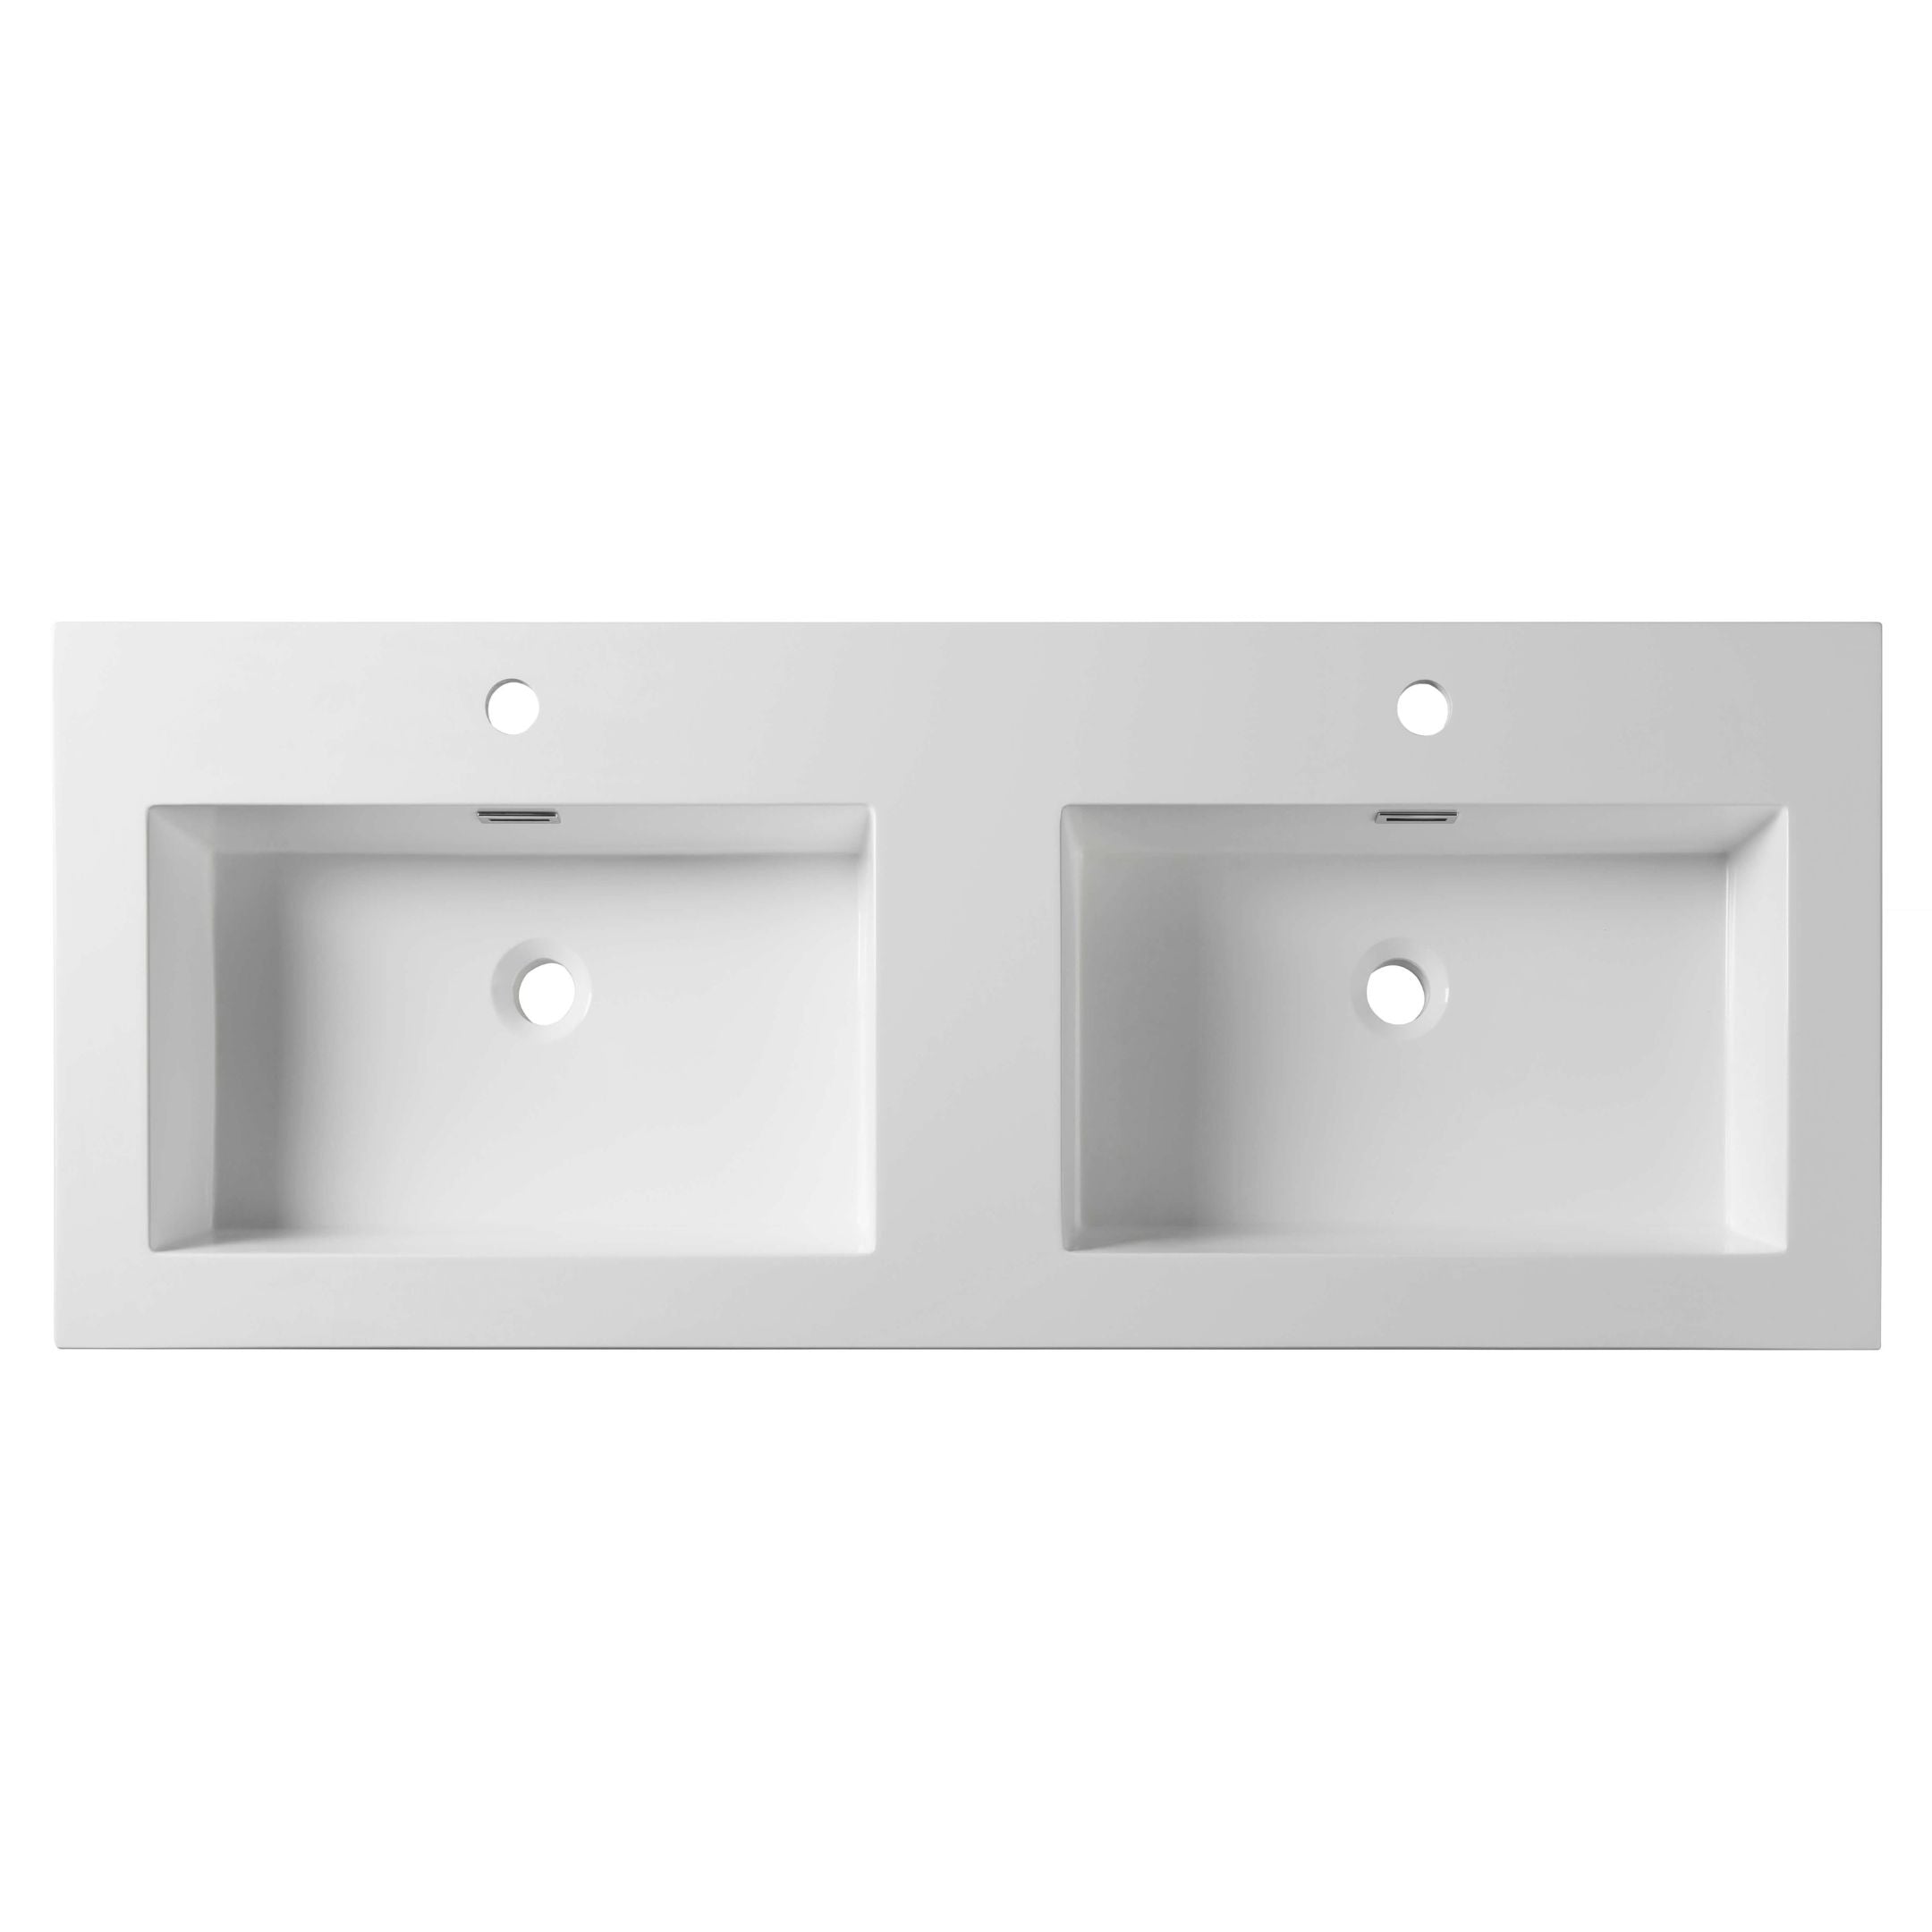 Double Acrylic Basin for Single whole Faucets